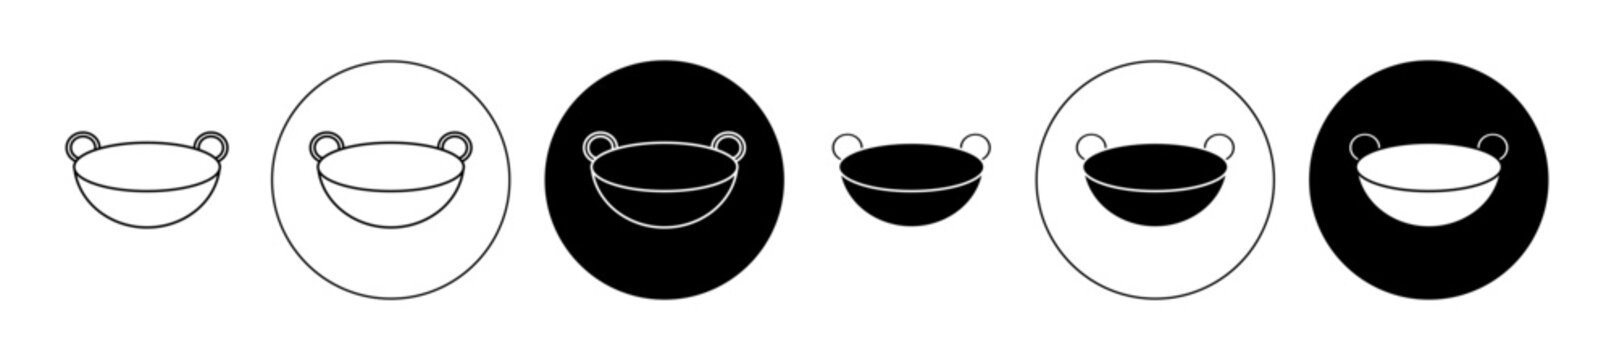 wok icon set in black. chinese food fry wok vector sign for Ui designs.